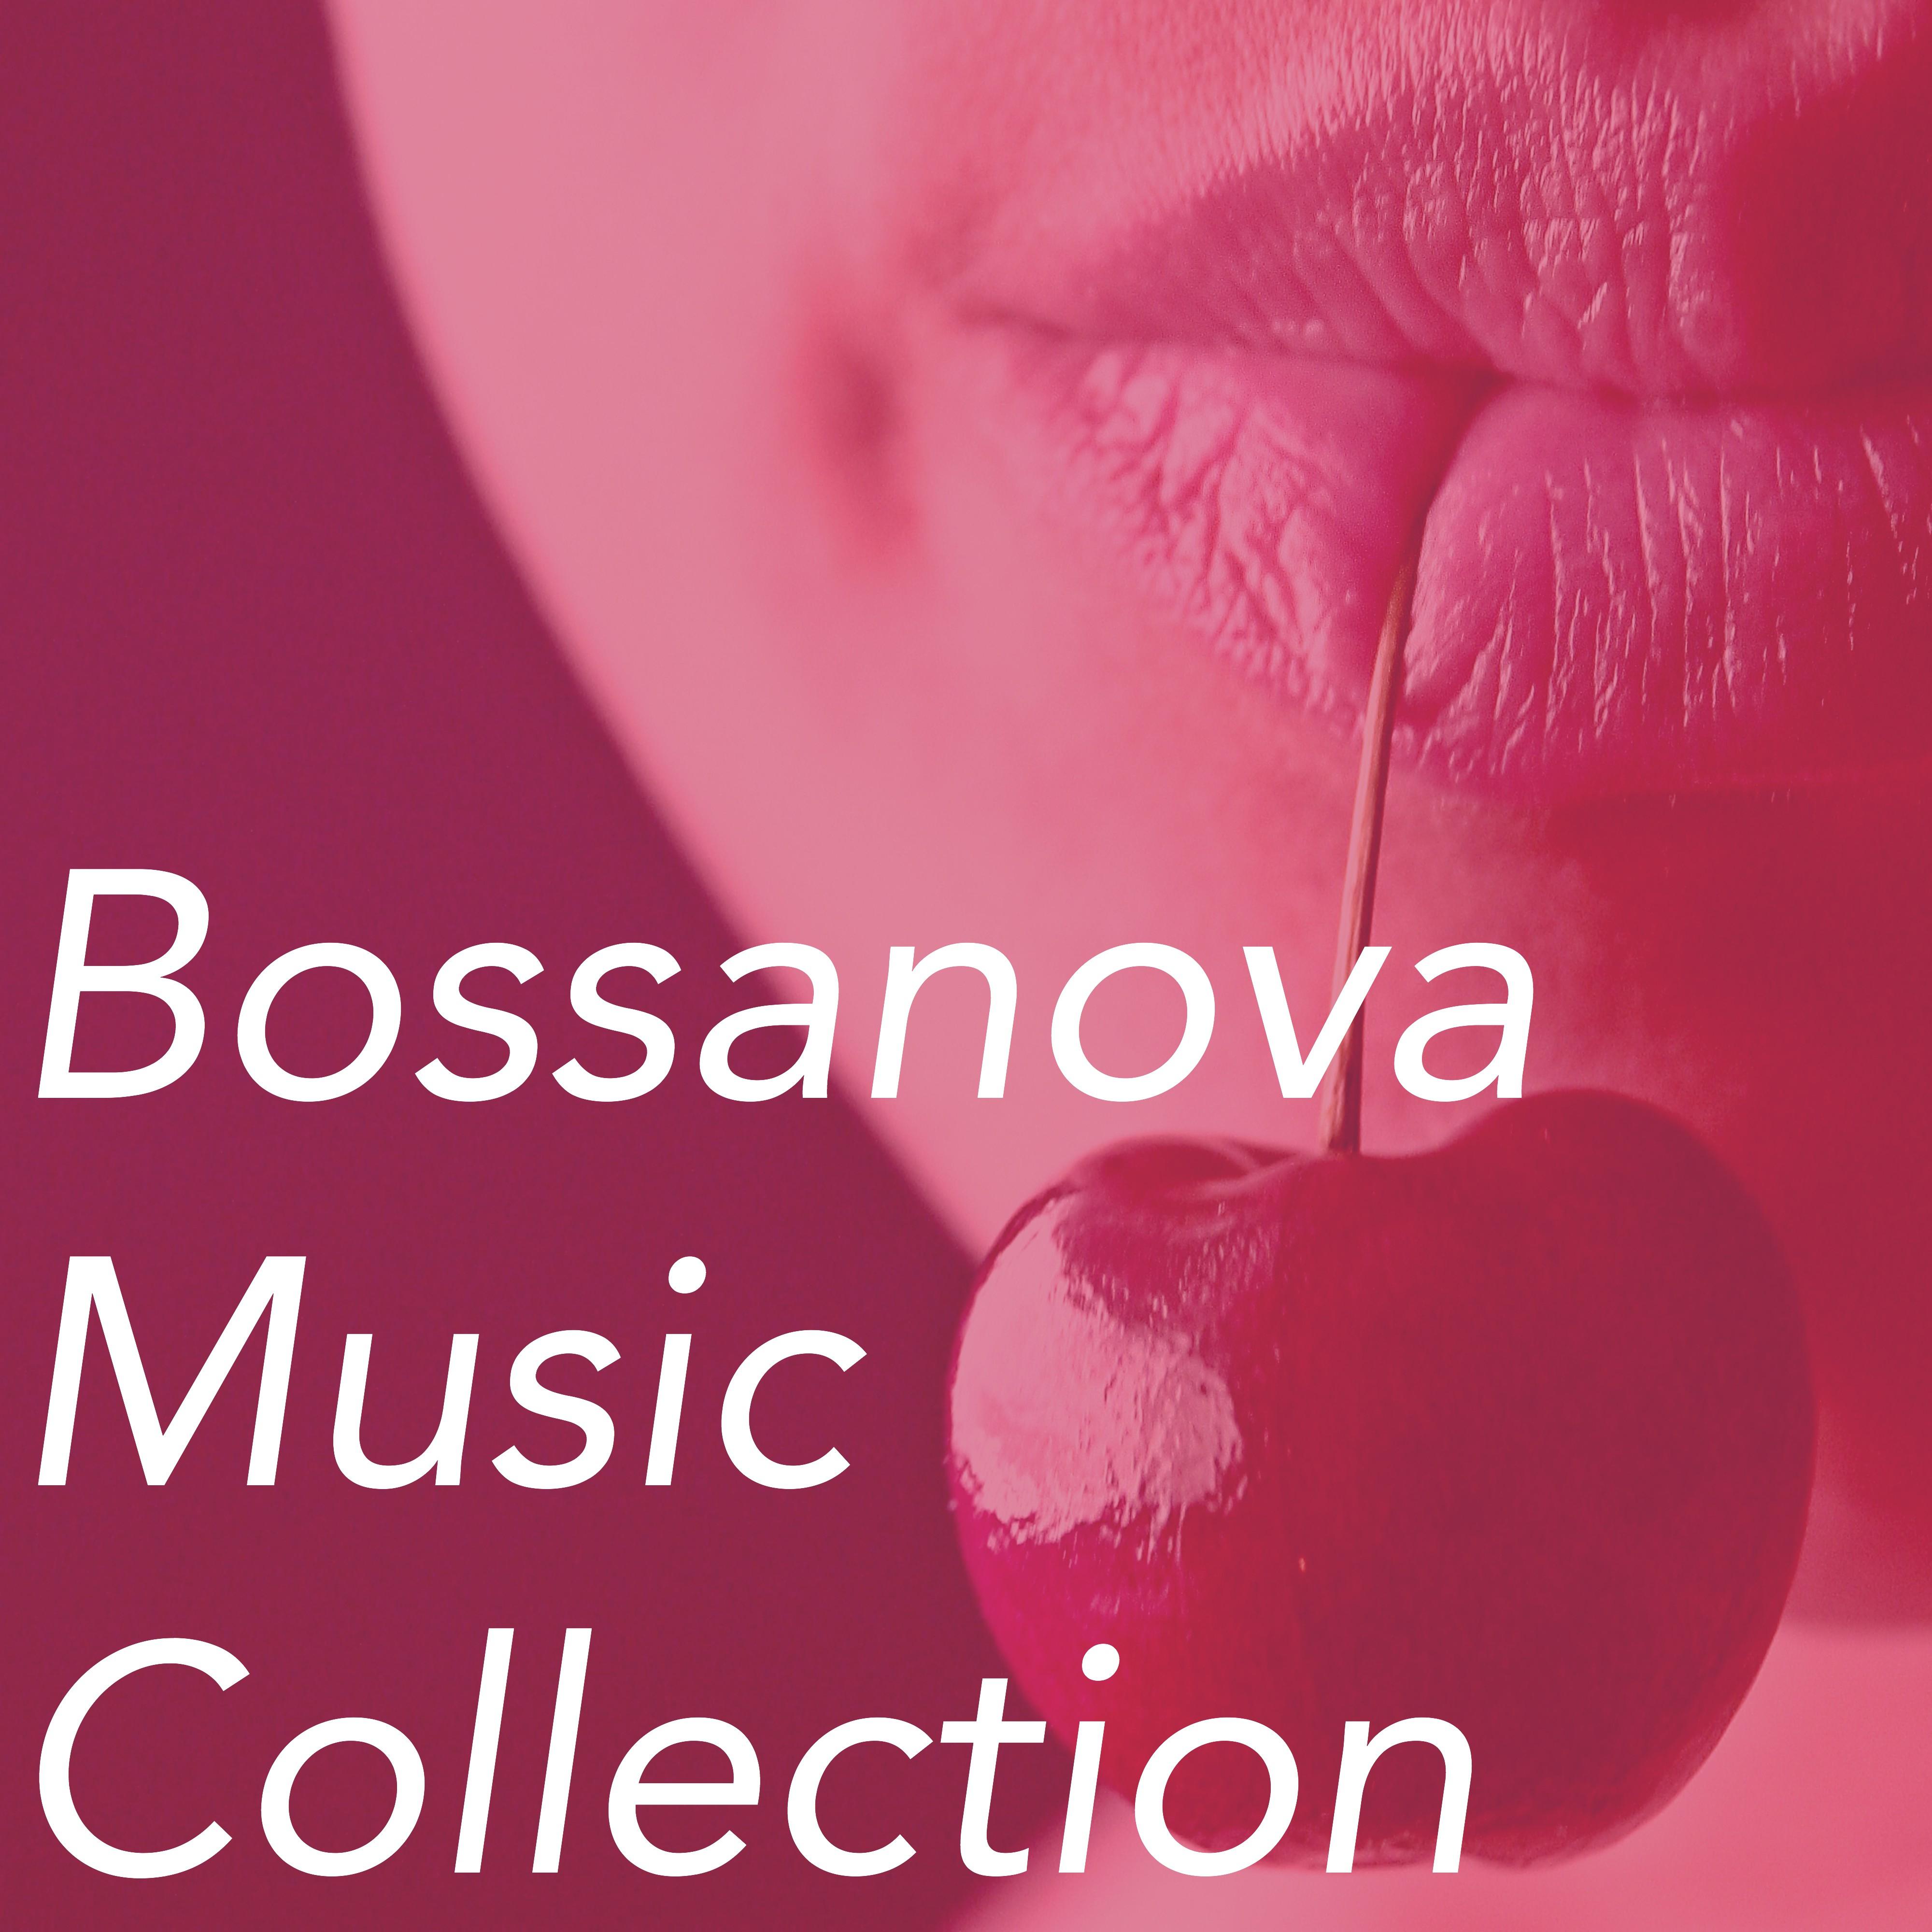 Bossanova Music Collection - **** Smooth Jazz Radio & Bossanova Background for Cocktail Party and Just Relax